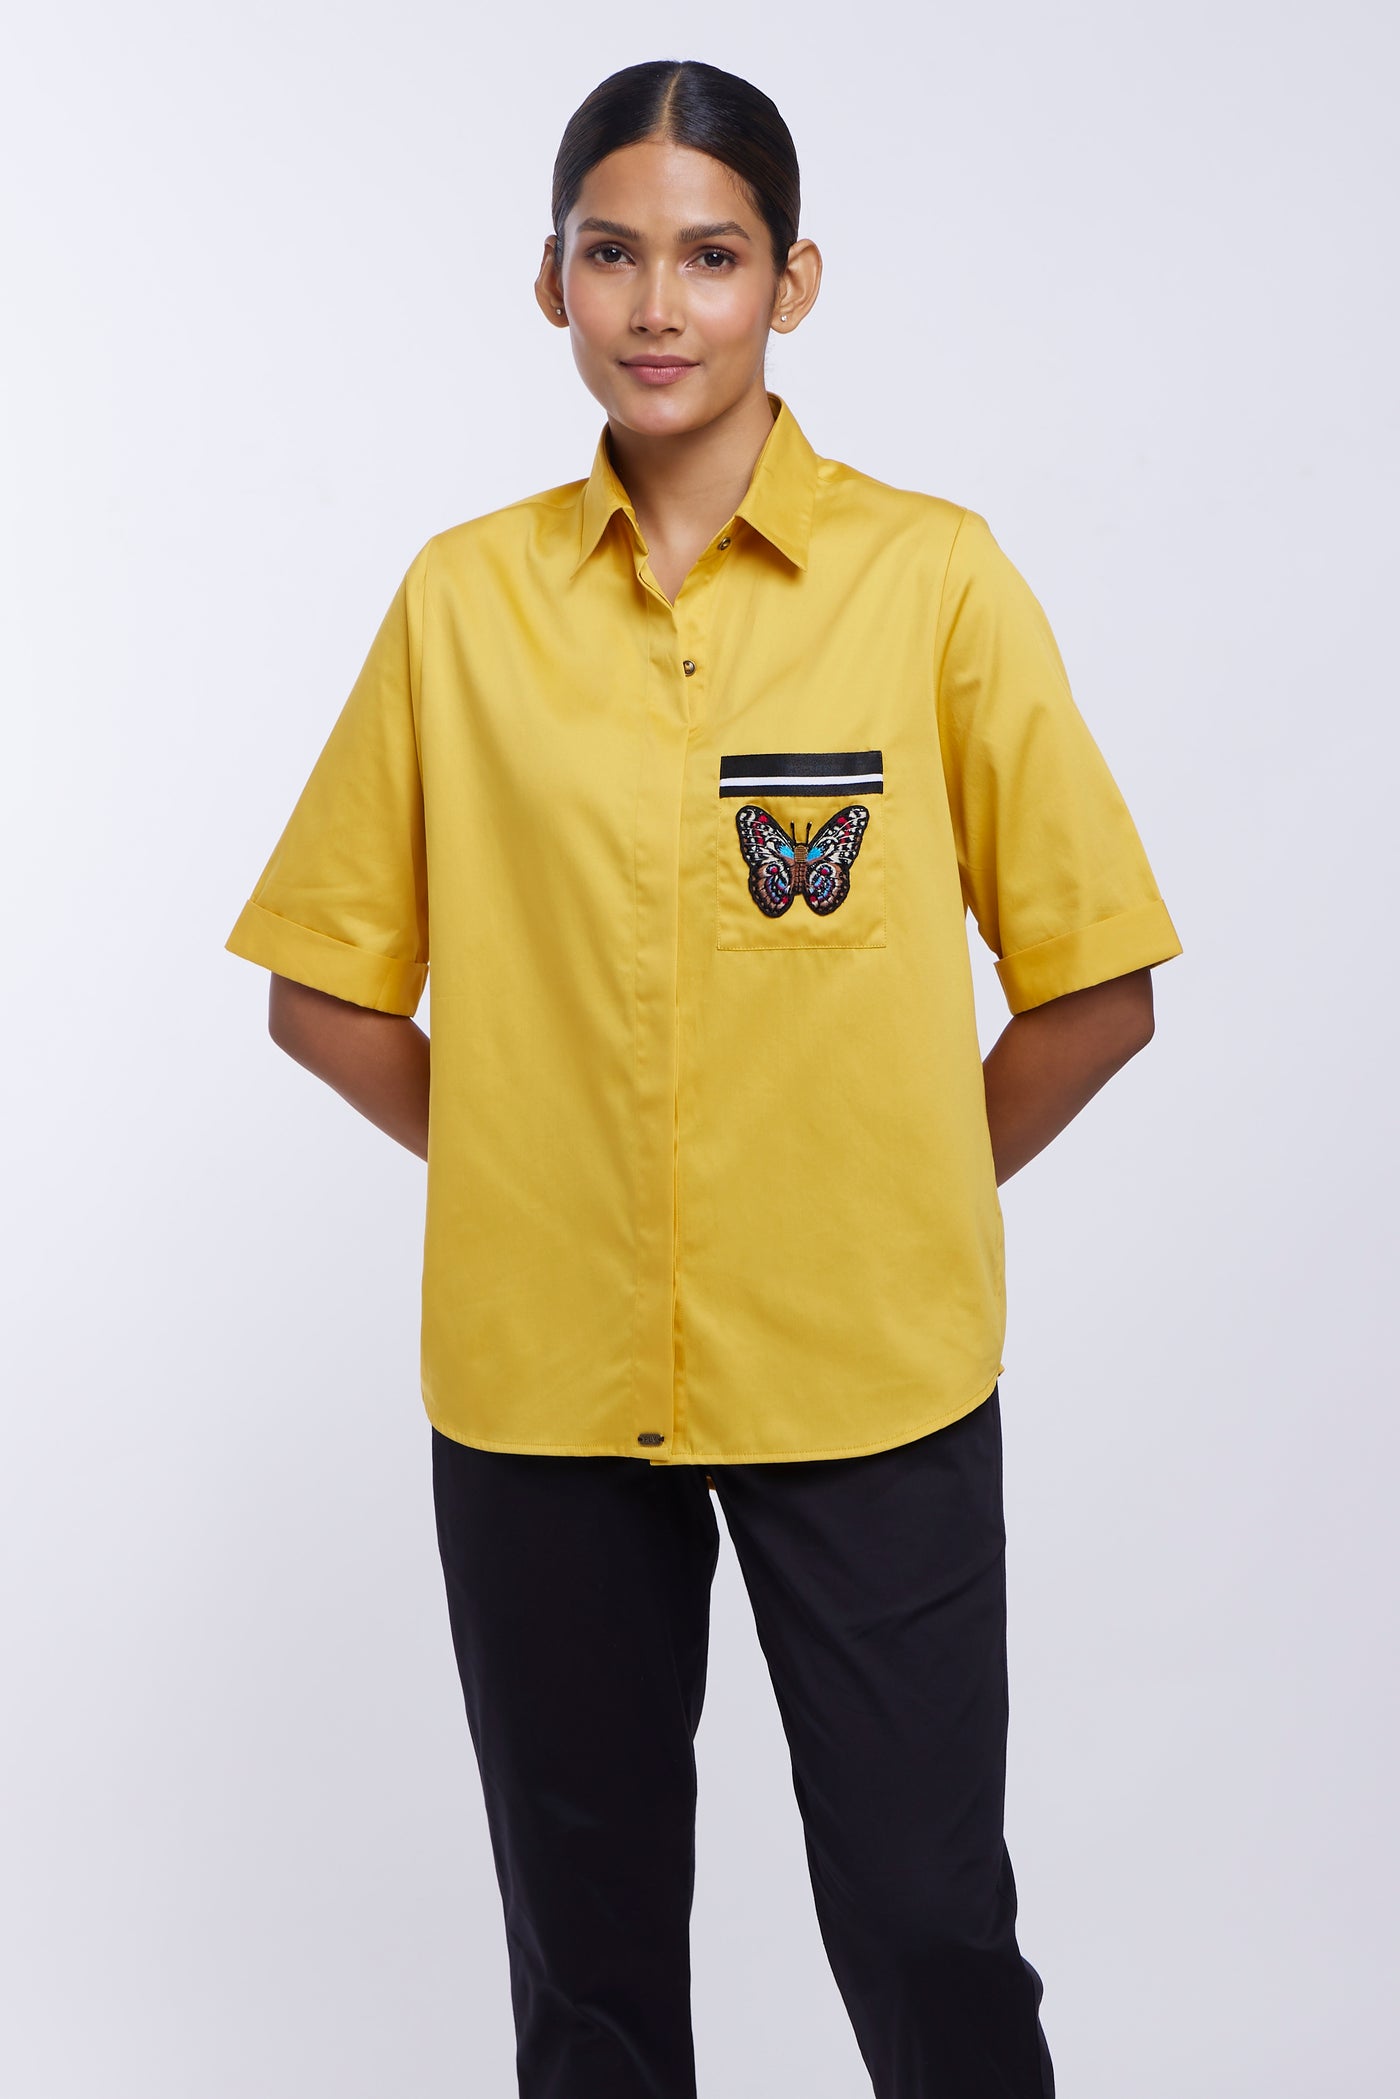 PLV Garden Canary Yellow Butterfly Shirt